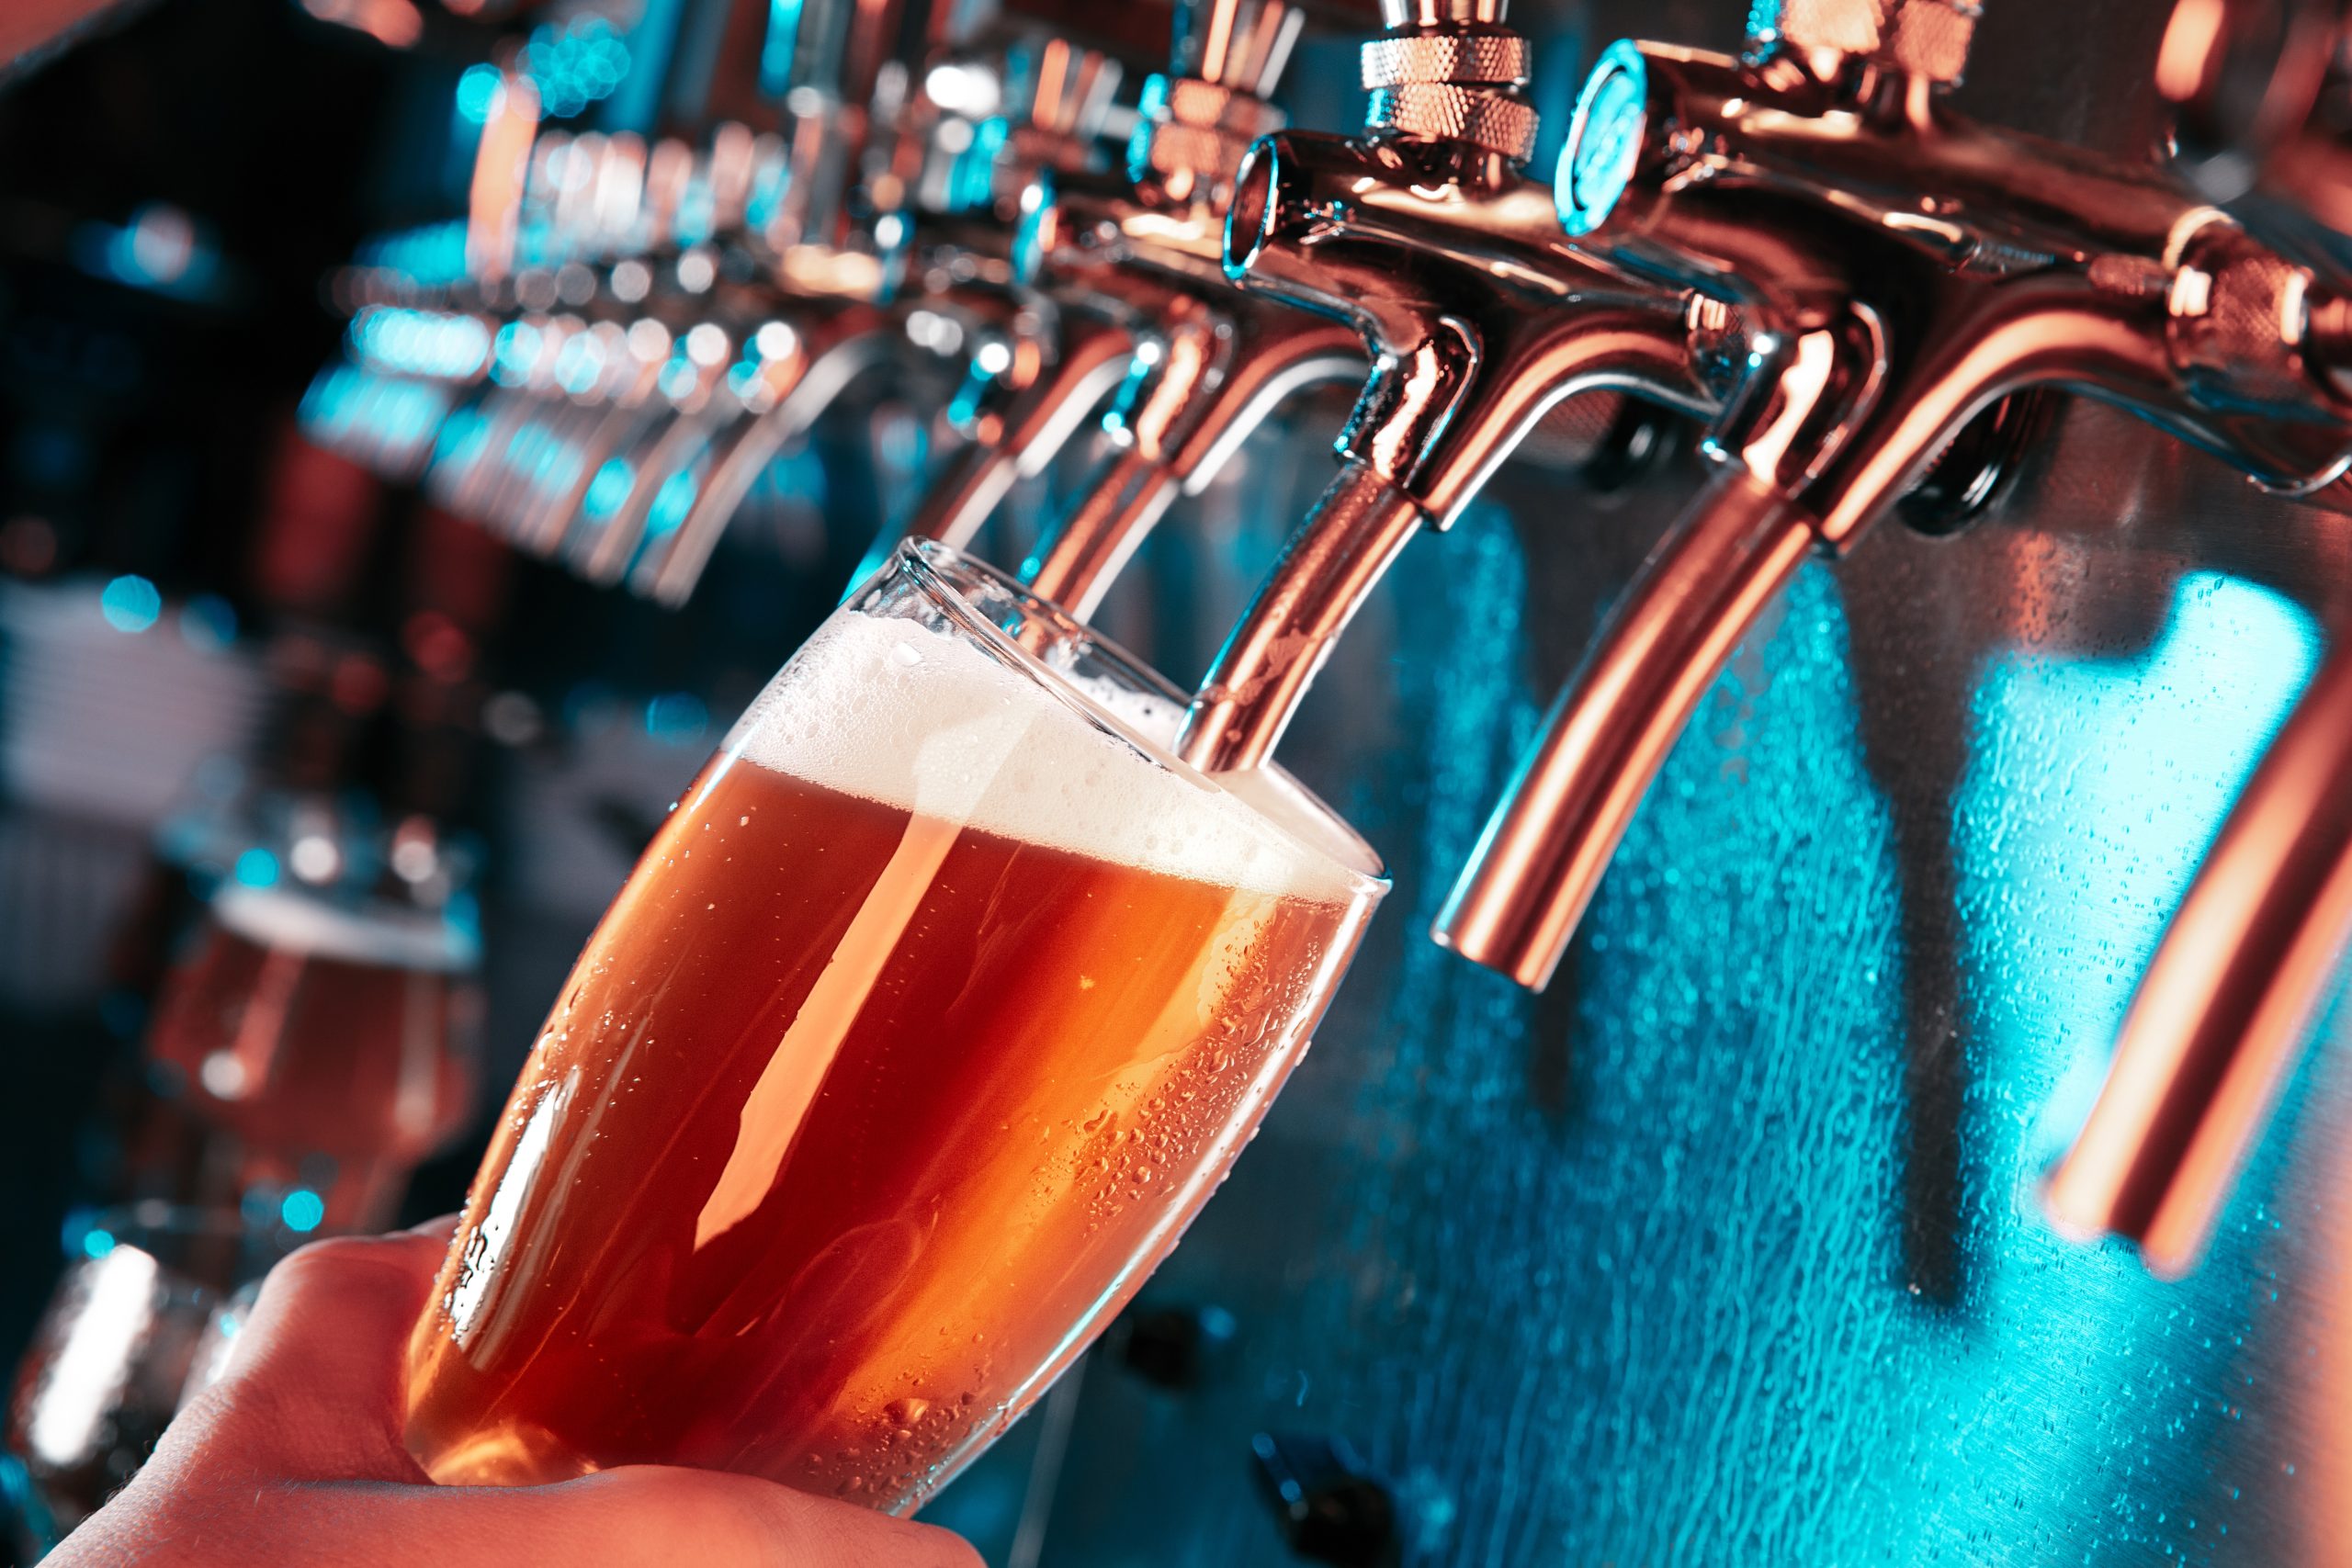 MPs in plea to cut duty on draught beer